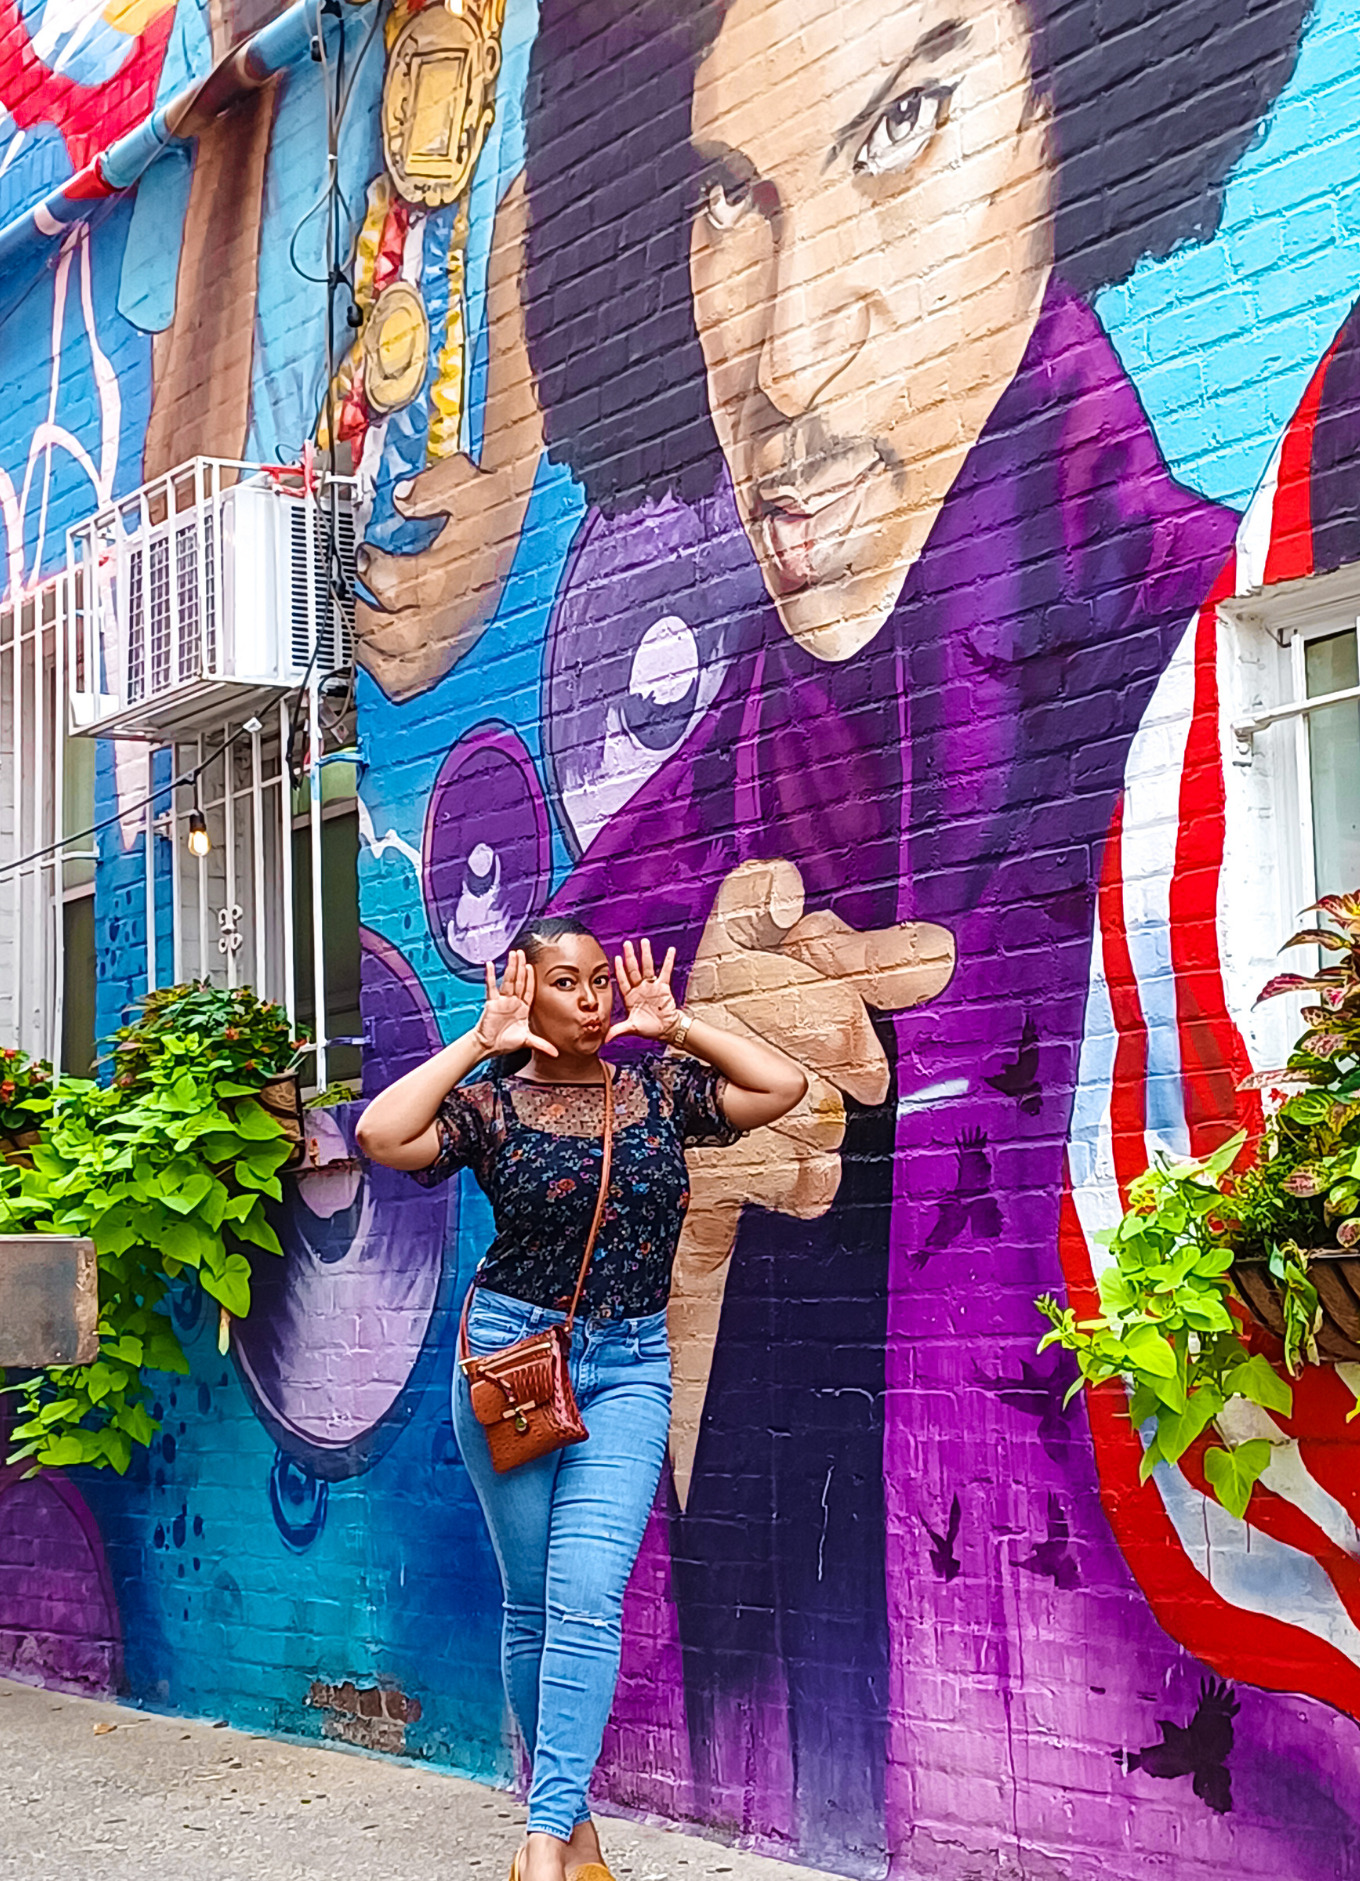 Rogan smiles and poses in front of a purple Prince mural next to Ben's Chili Bowl in northwest Washington, DC. She is wearing blue denim pants and a flower blouse.